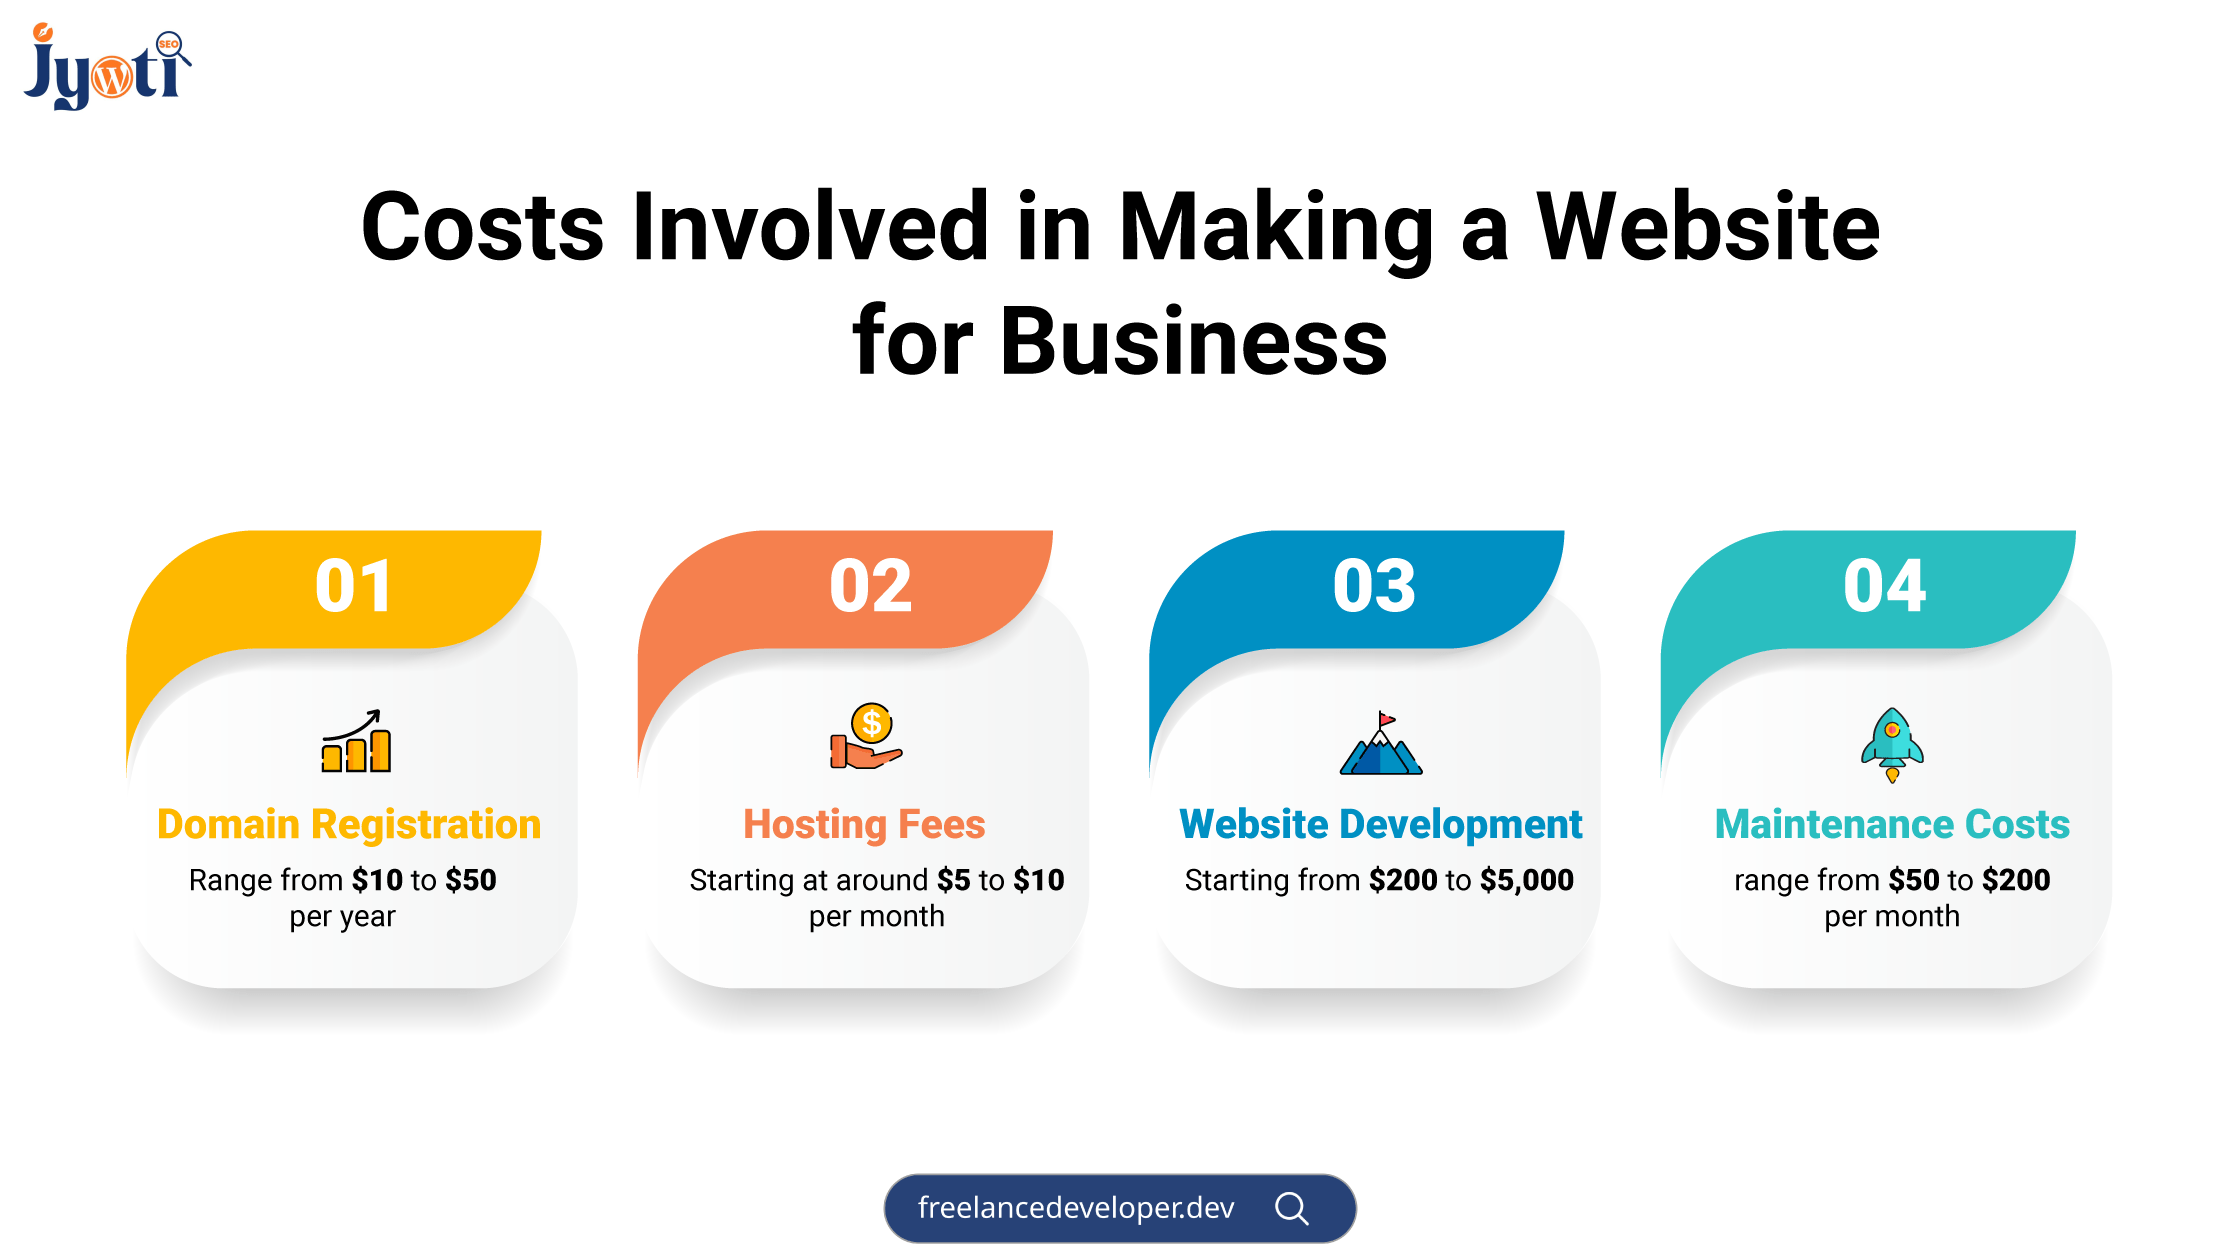 Costs Involved in Making a Business Website